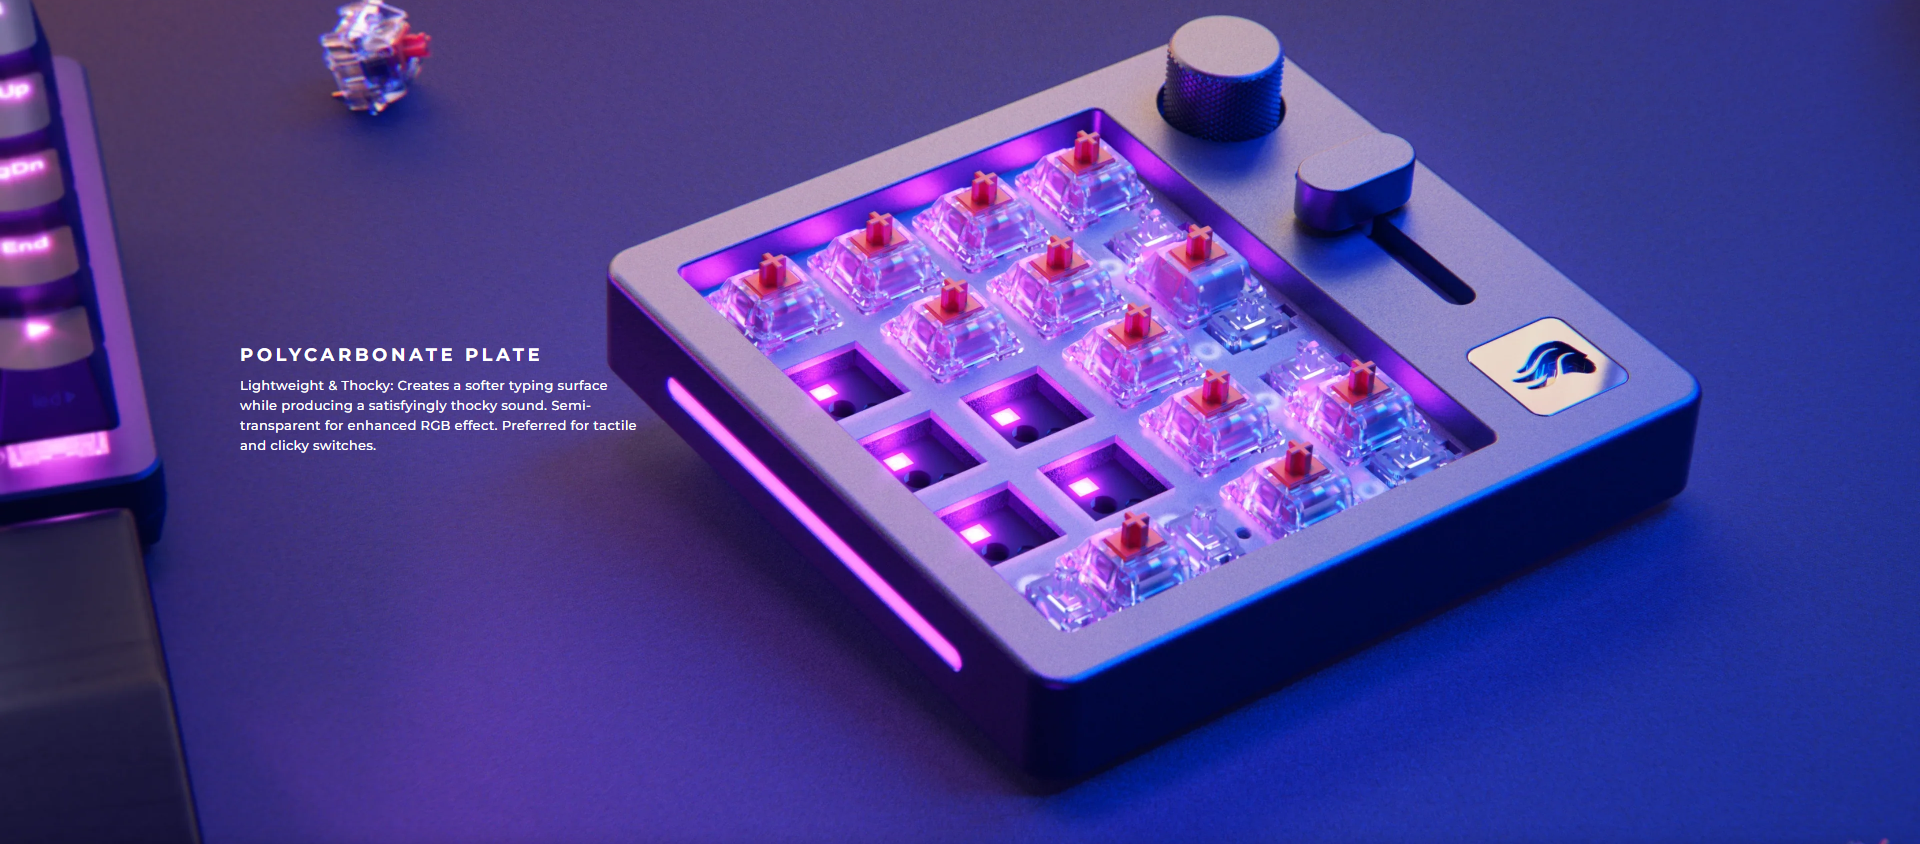 A large marketing image providing additional information about the product Glorious GMMK Numpad Mechanical Switch Plate - Polycarbonate - Additional alt info not provided